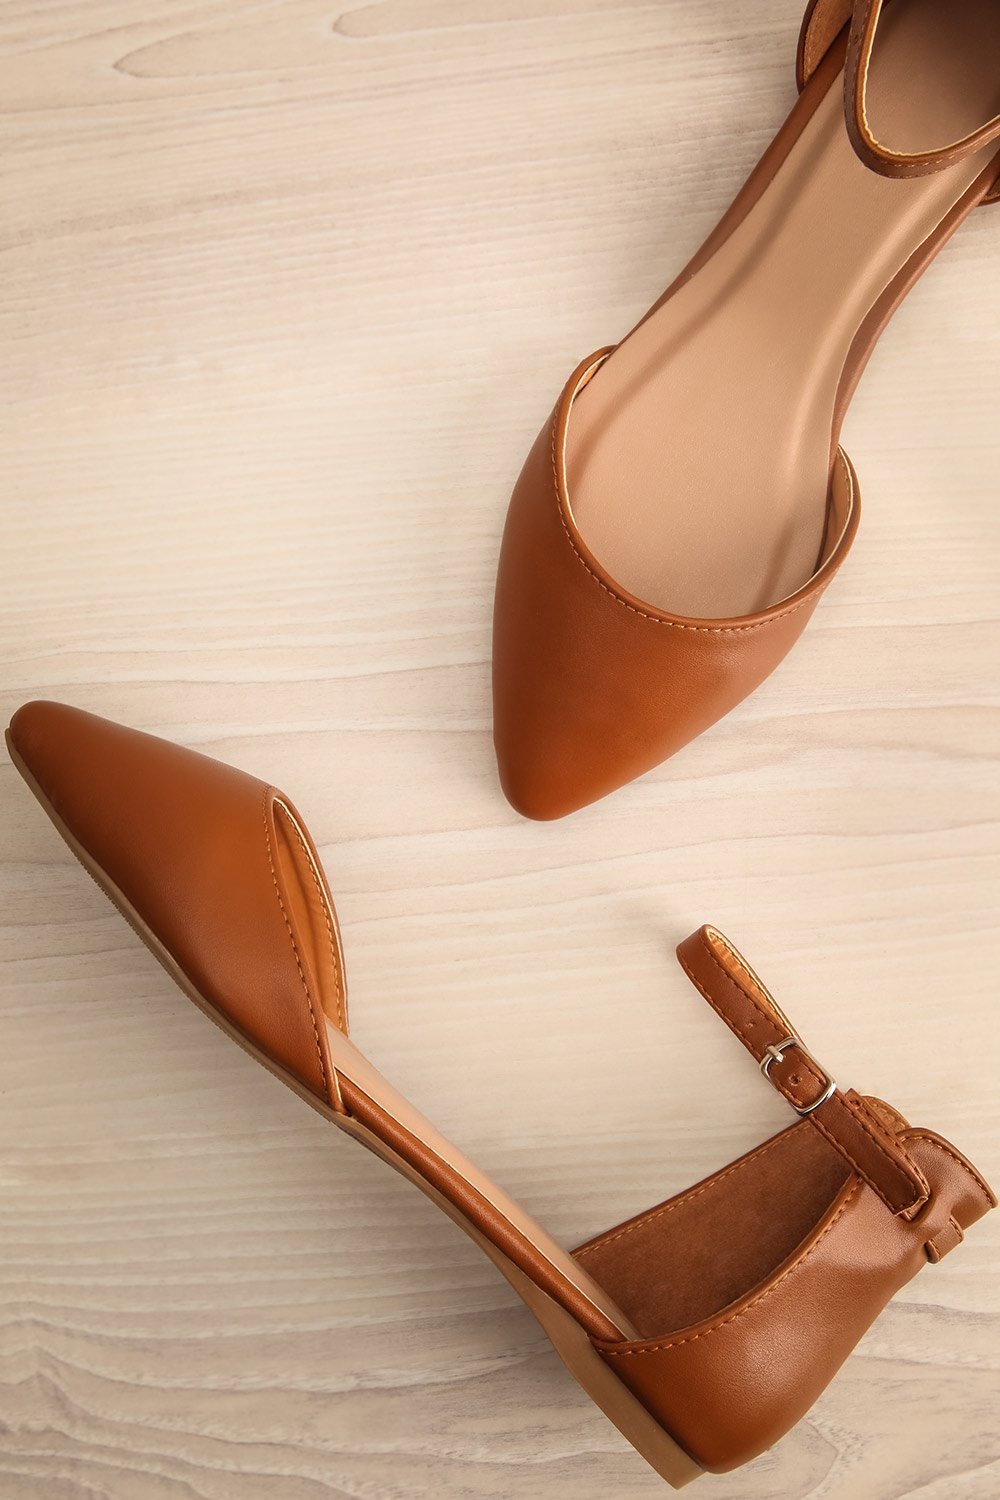 Puno Cognac | Brown Pointed Toe Flats